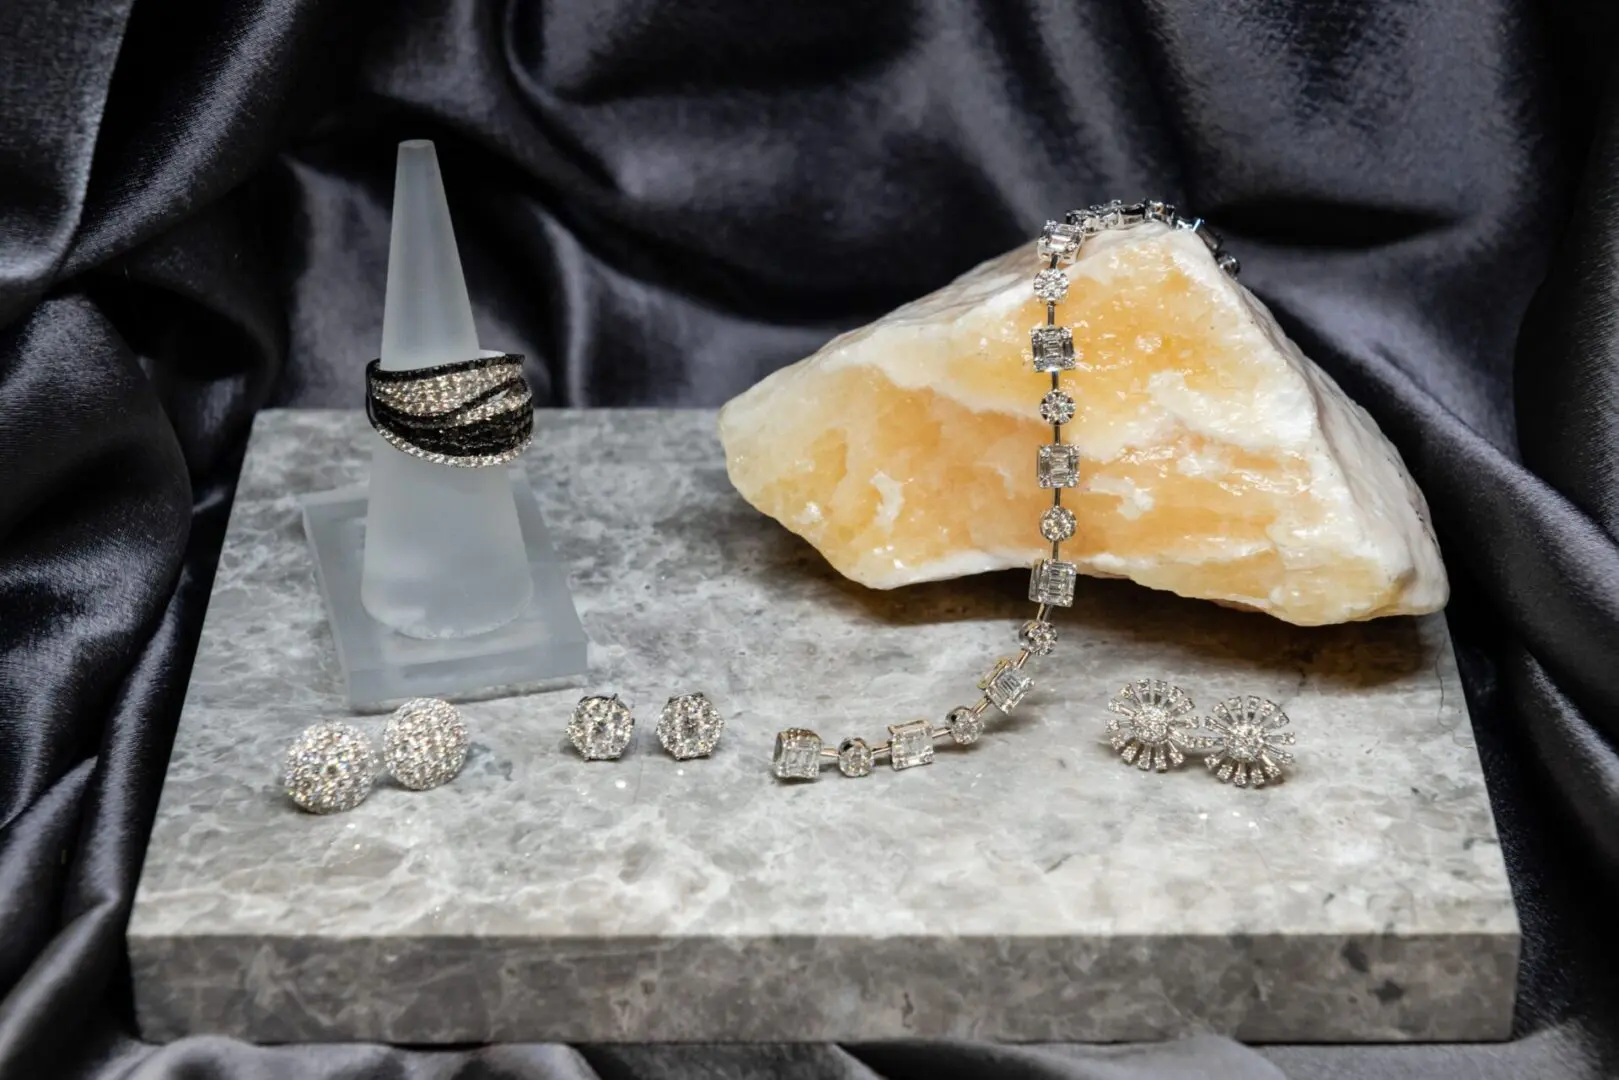 A table with jewelry and a rock on it